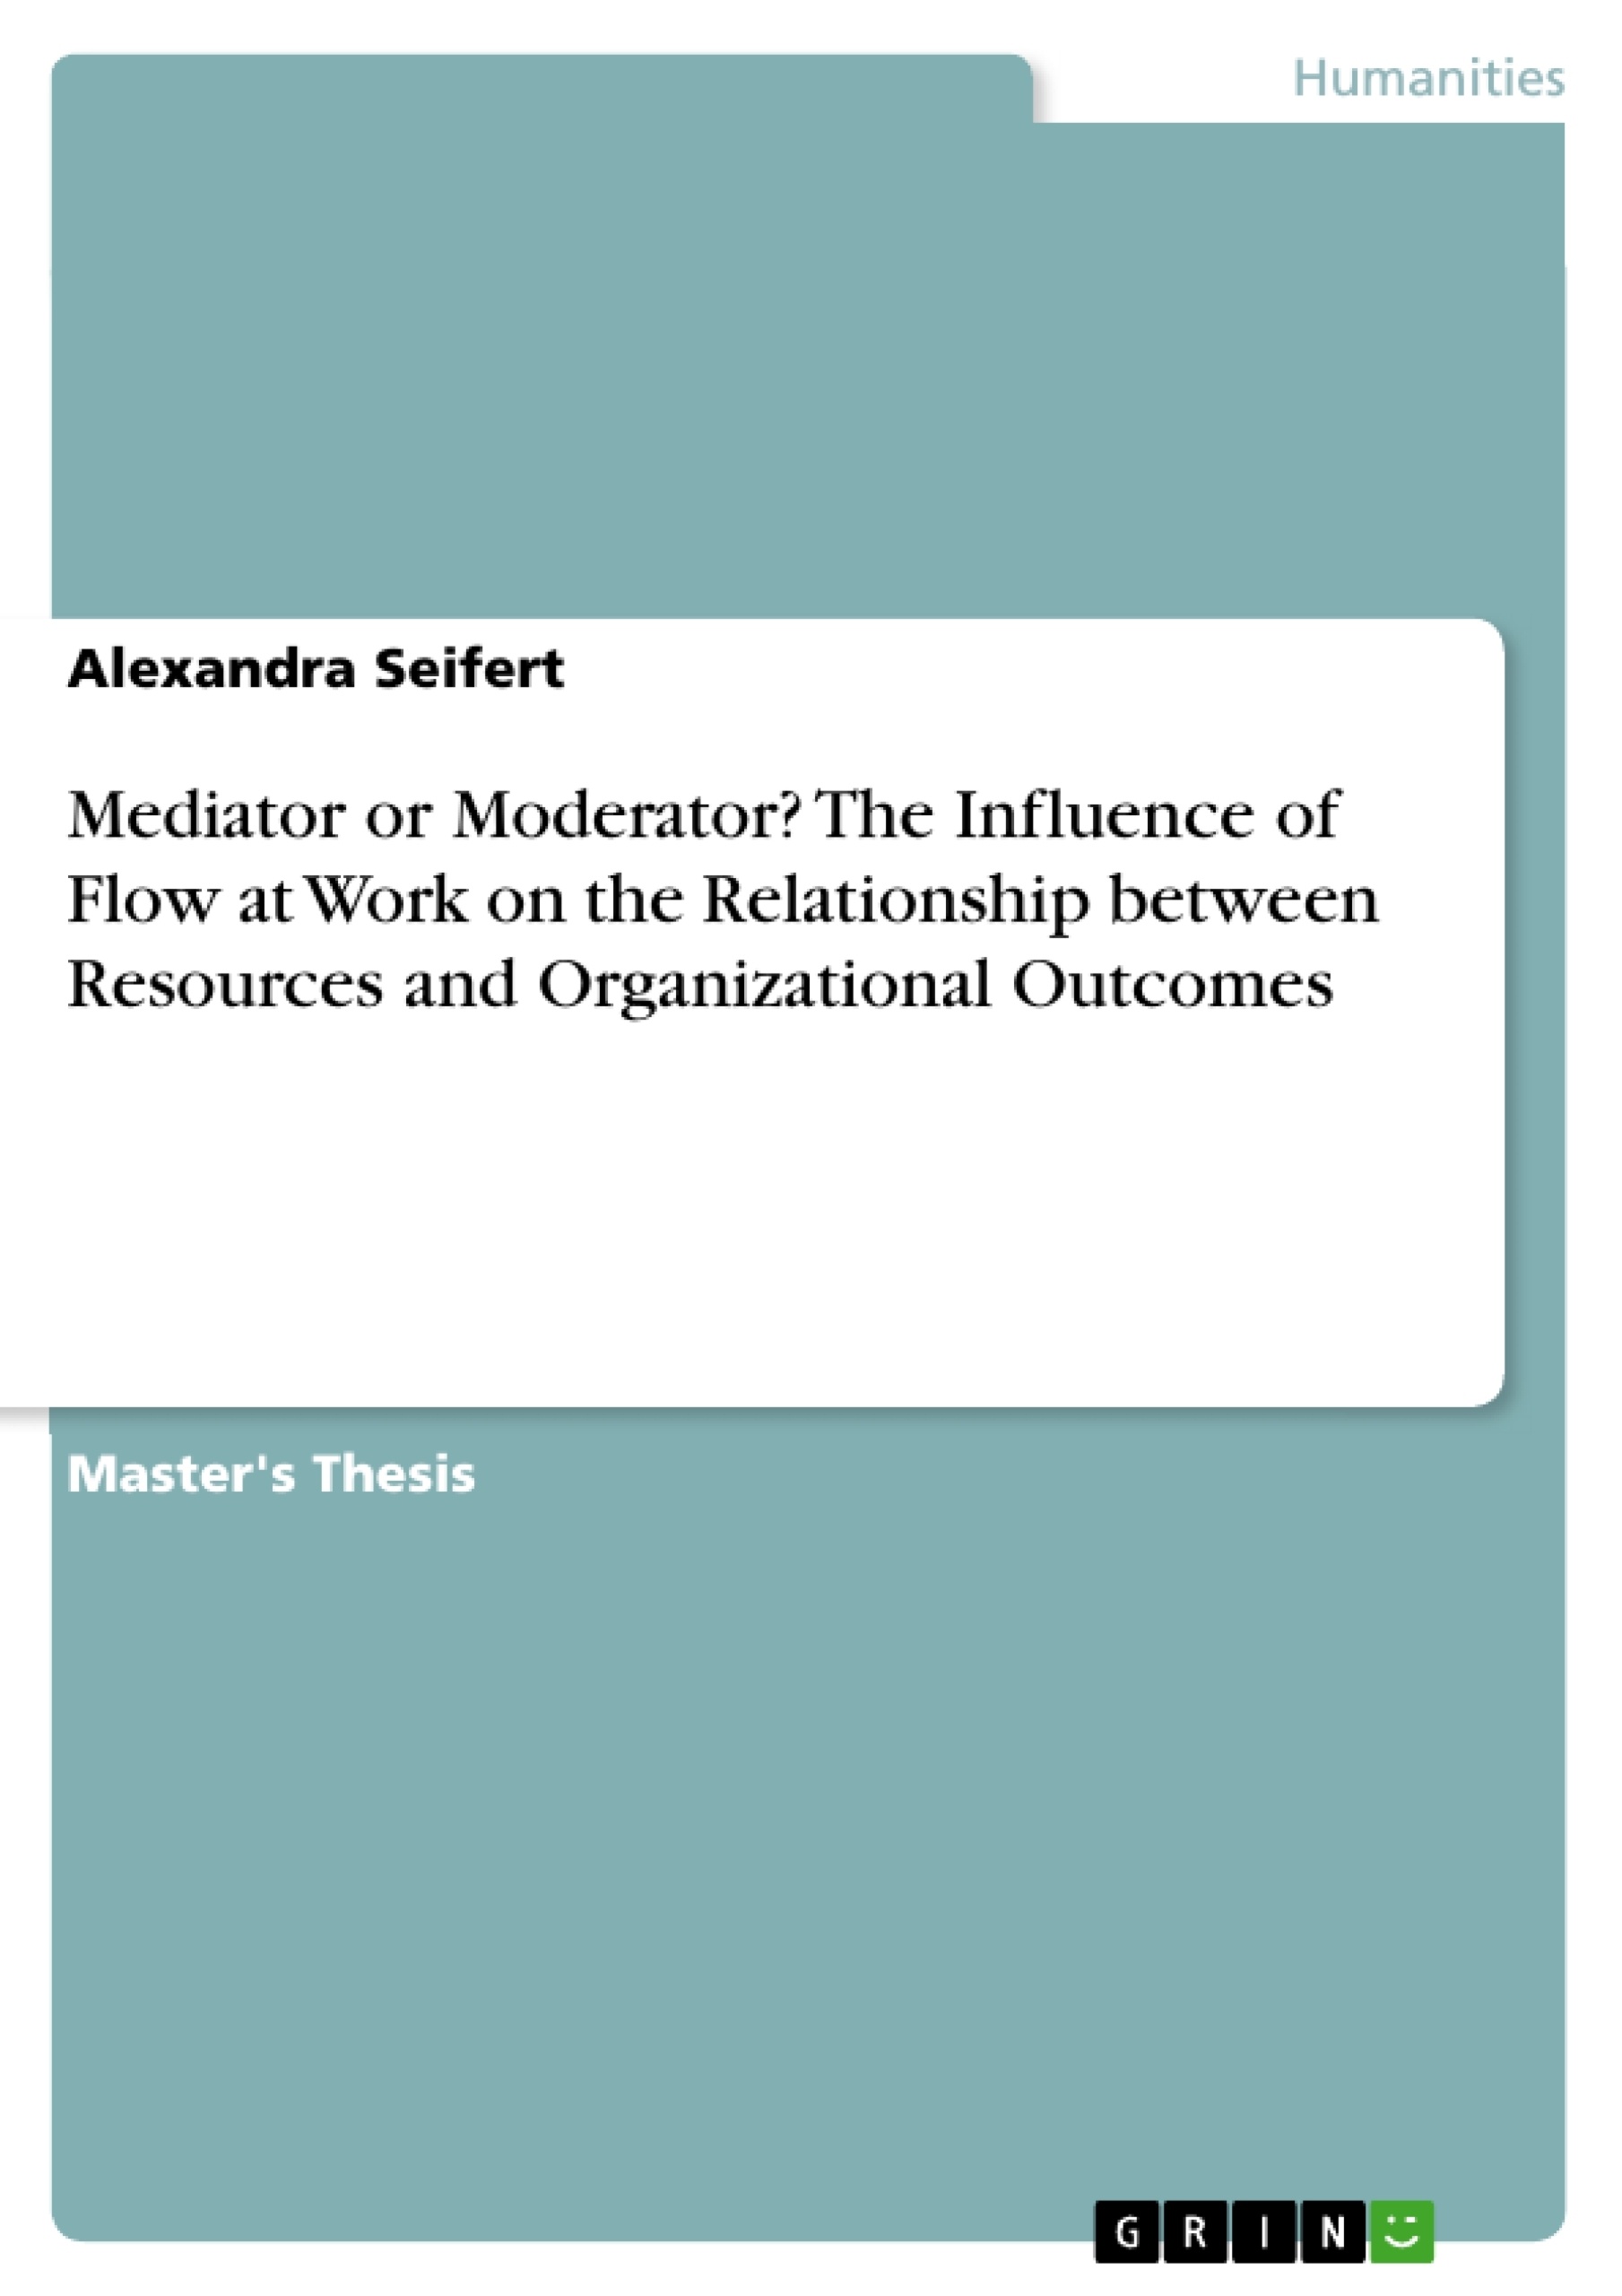 Title: Mediator or Moderator? The Influence of Flow at Work on the Relationship between Resources and Organizational Outcomes